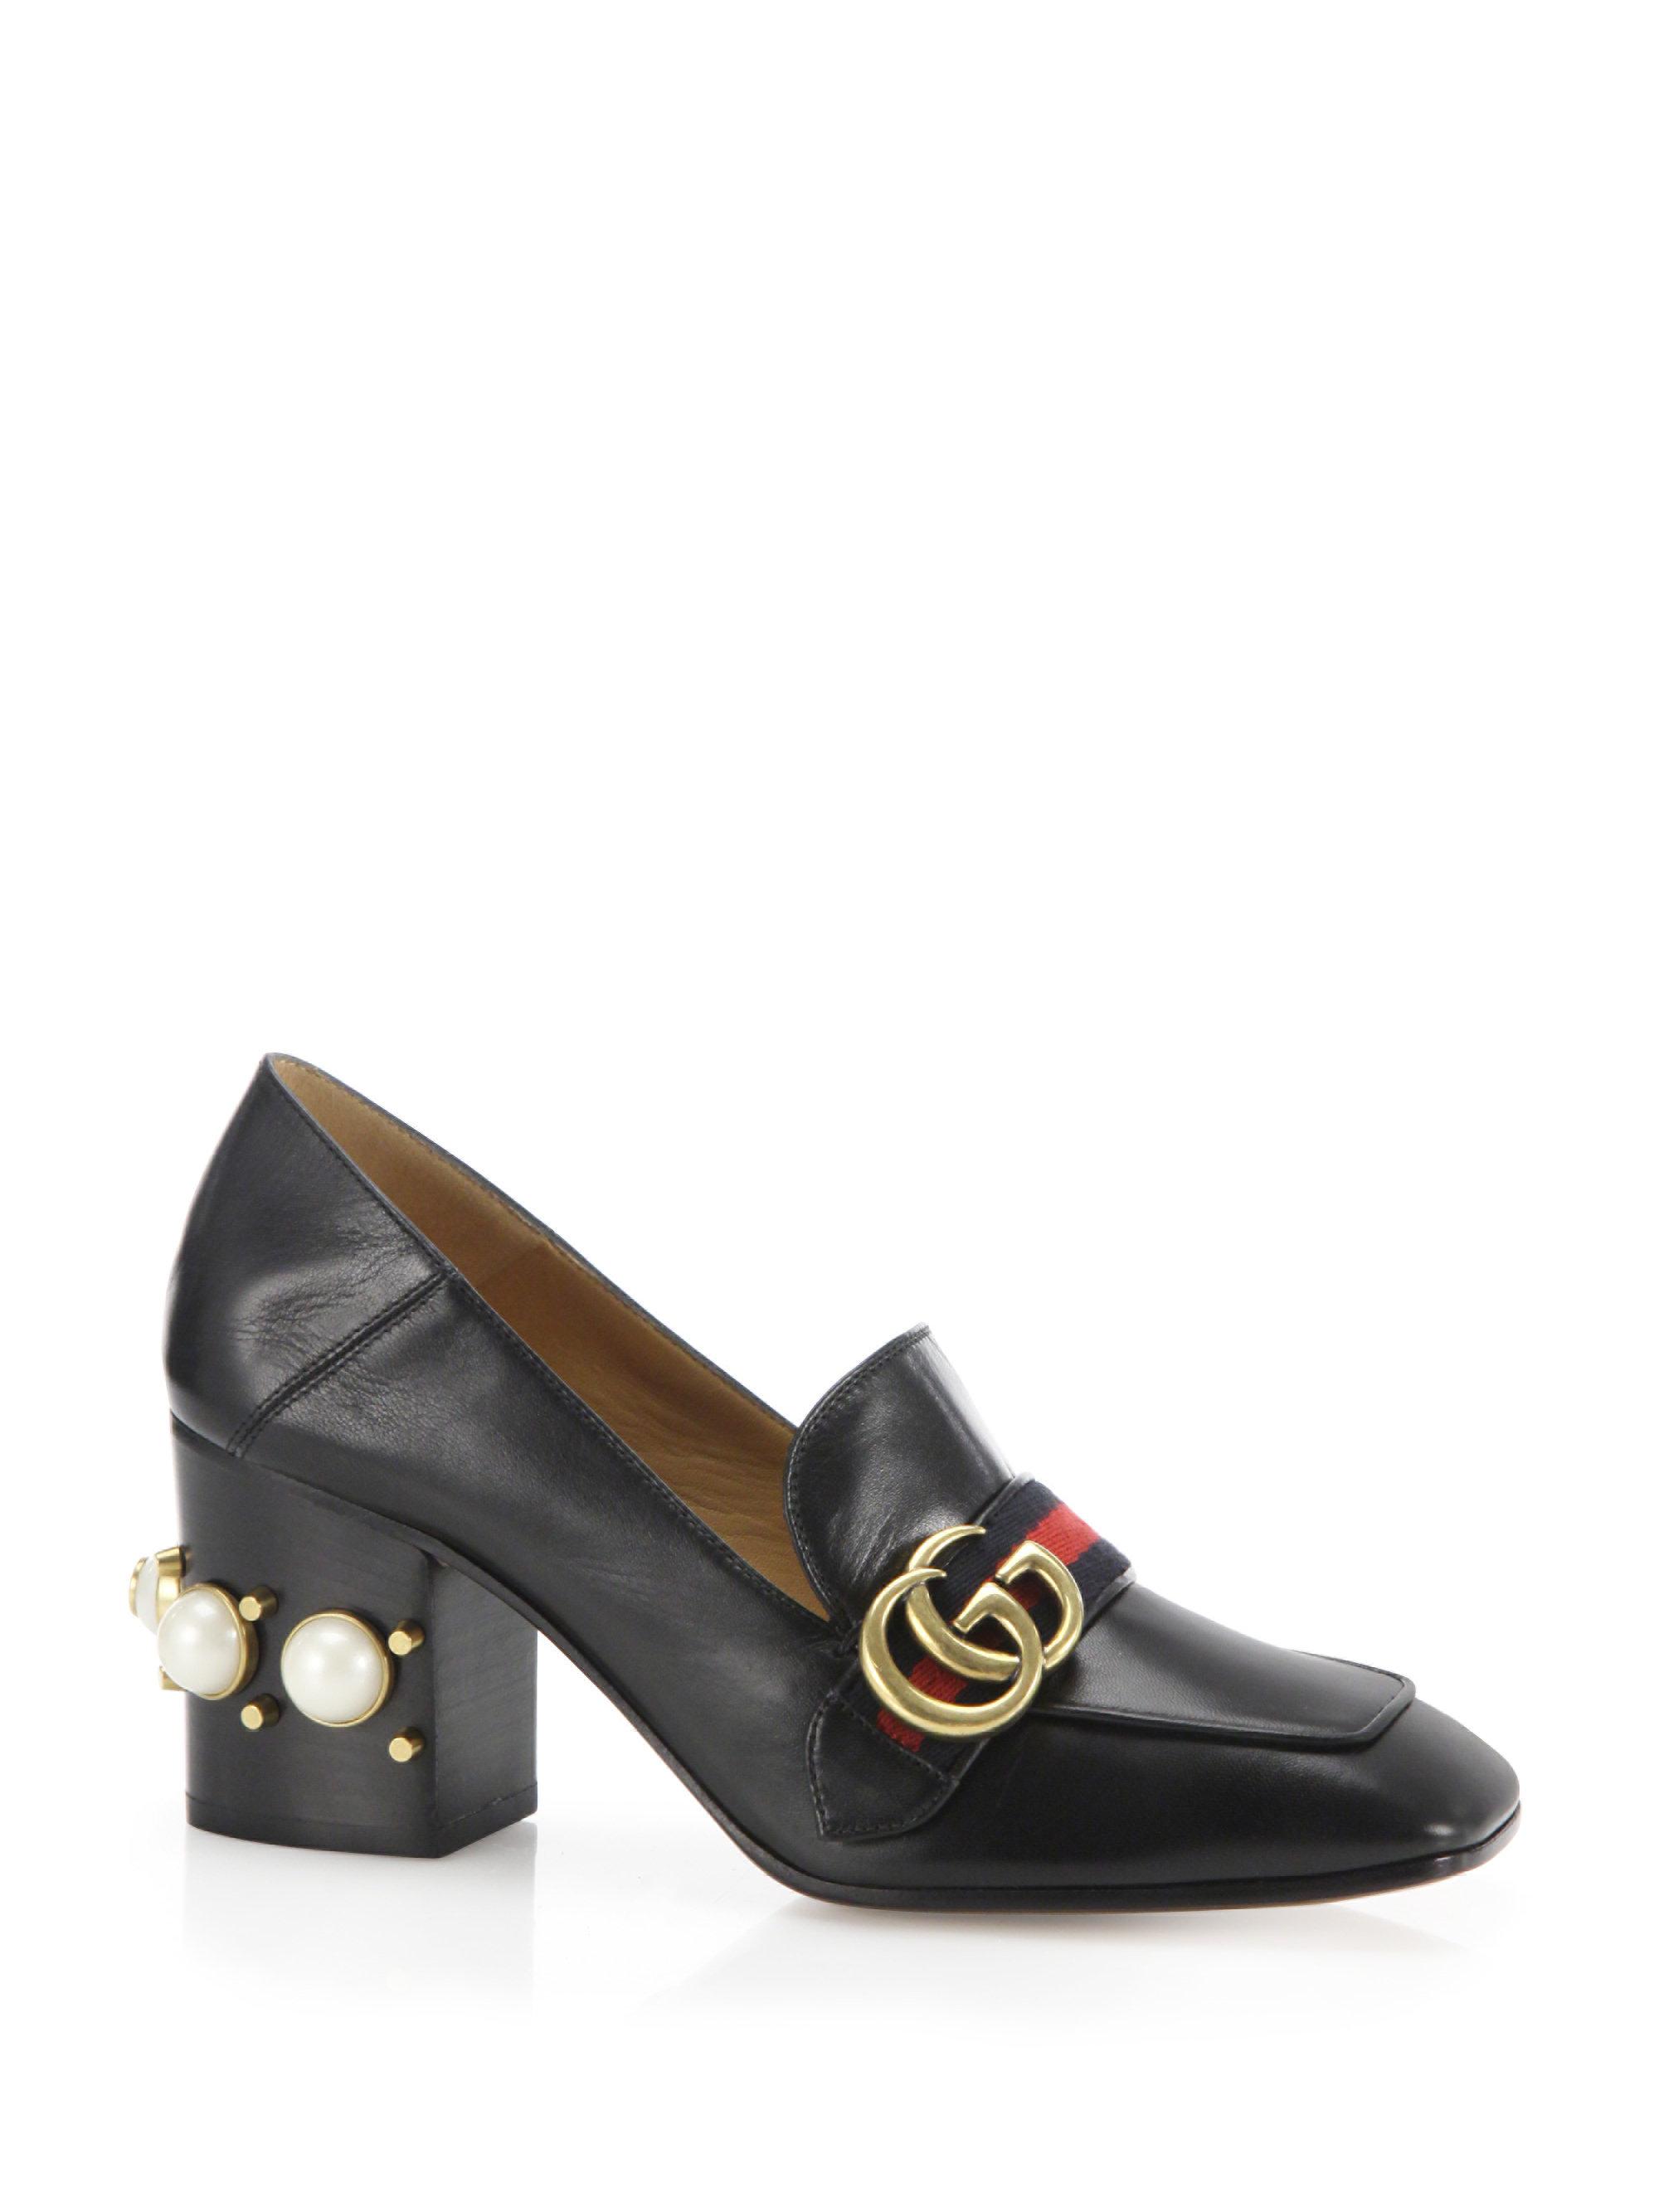 gucci loafers with pearls on heels